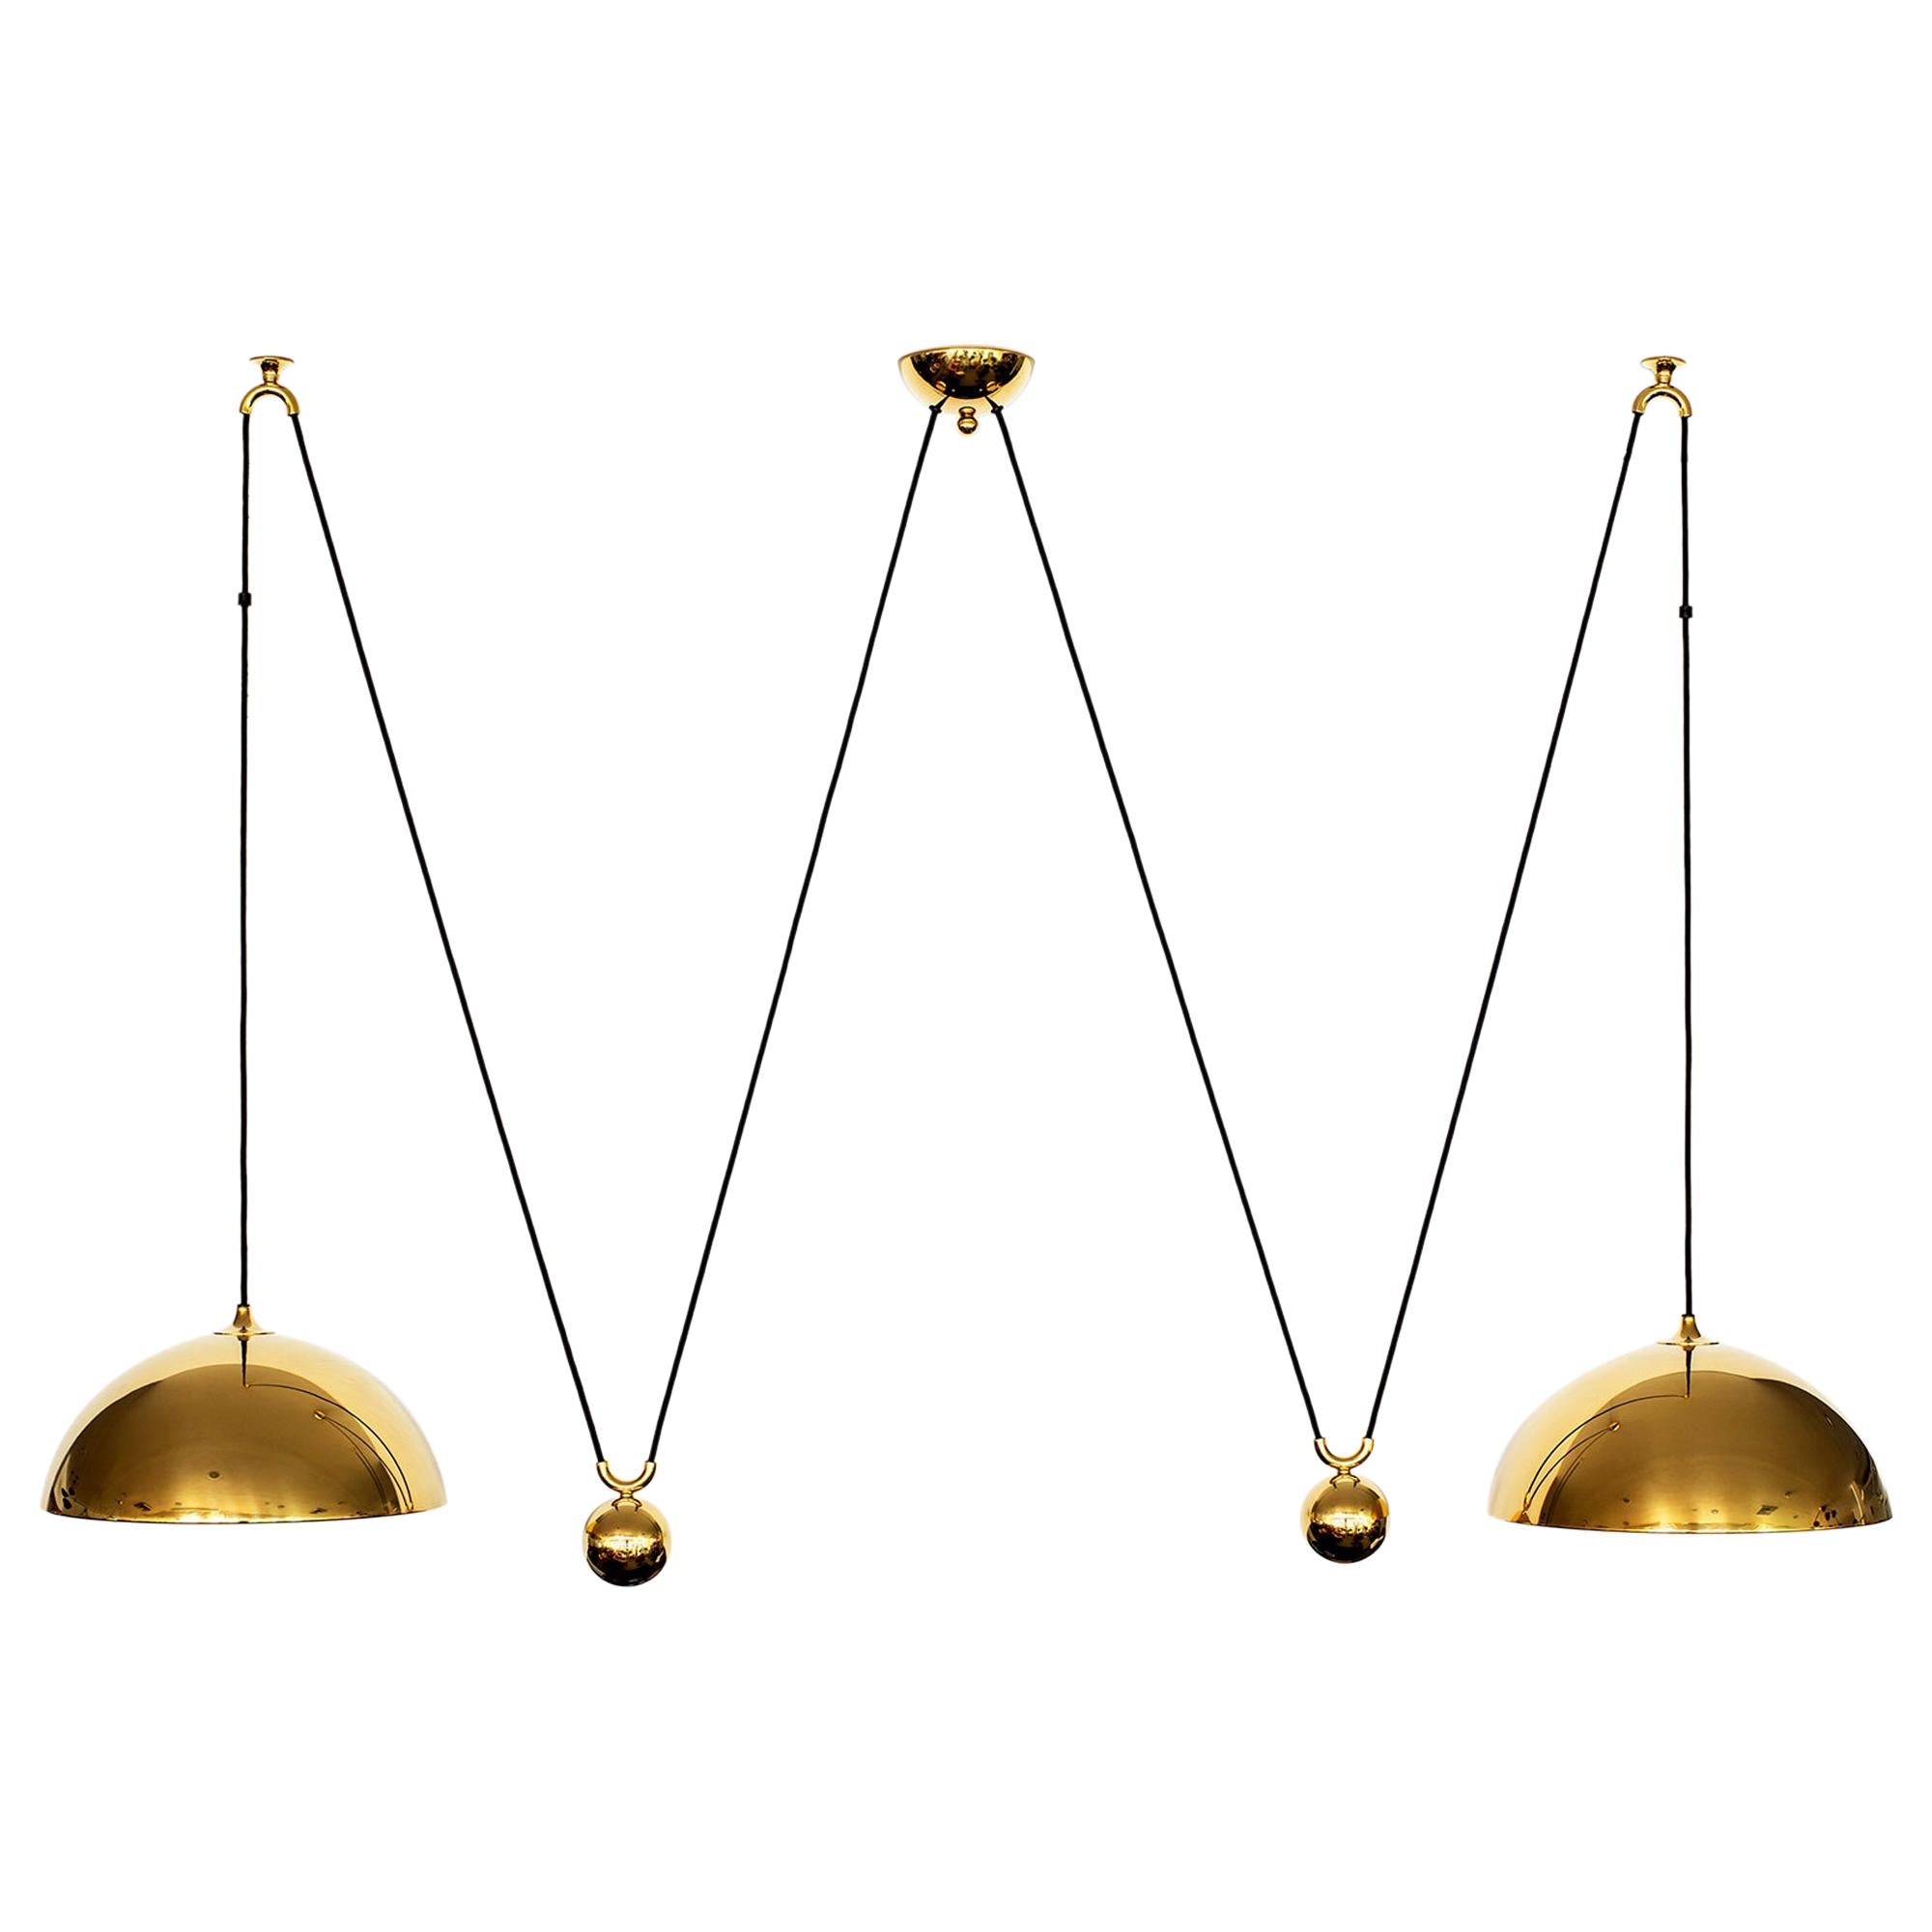 Florian Schulz Attributed Double Dome Counterbalance Pendant